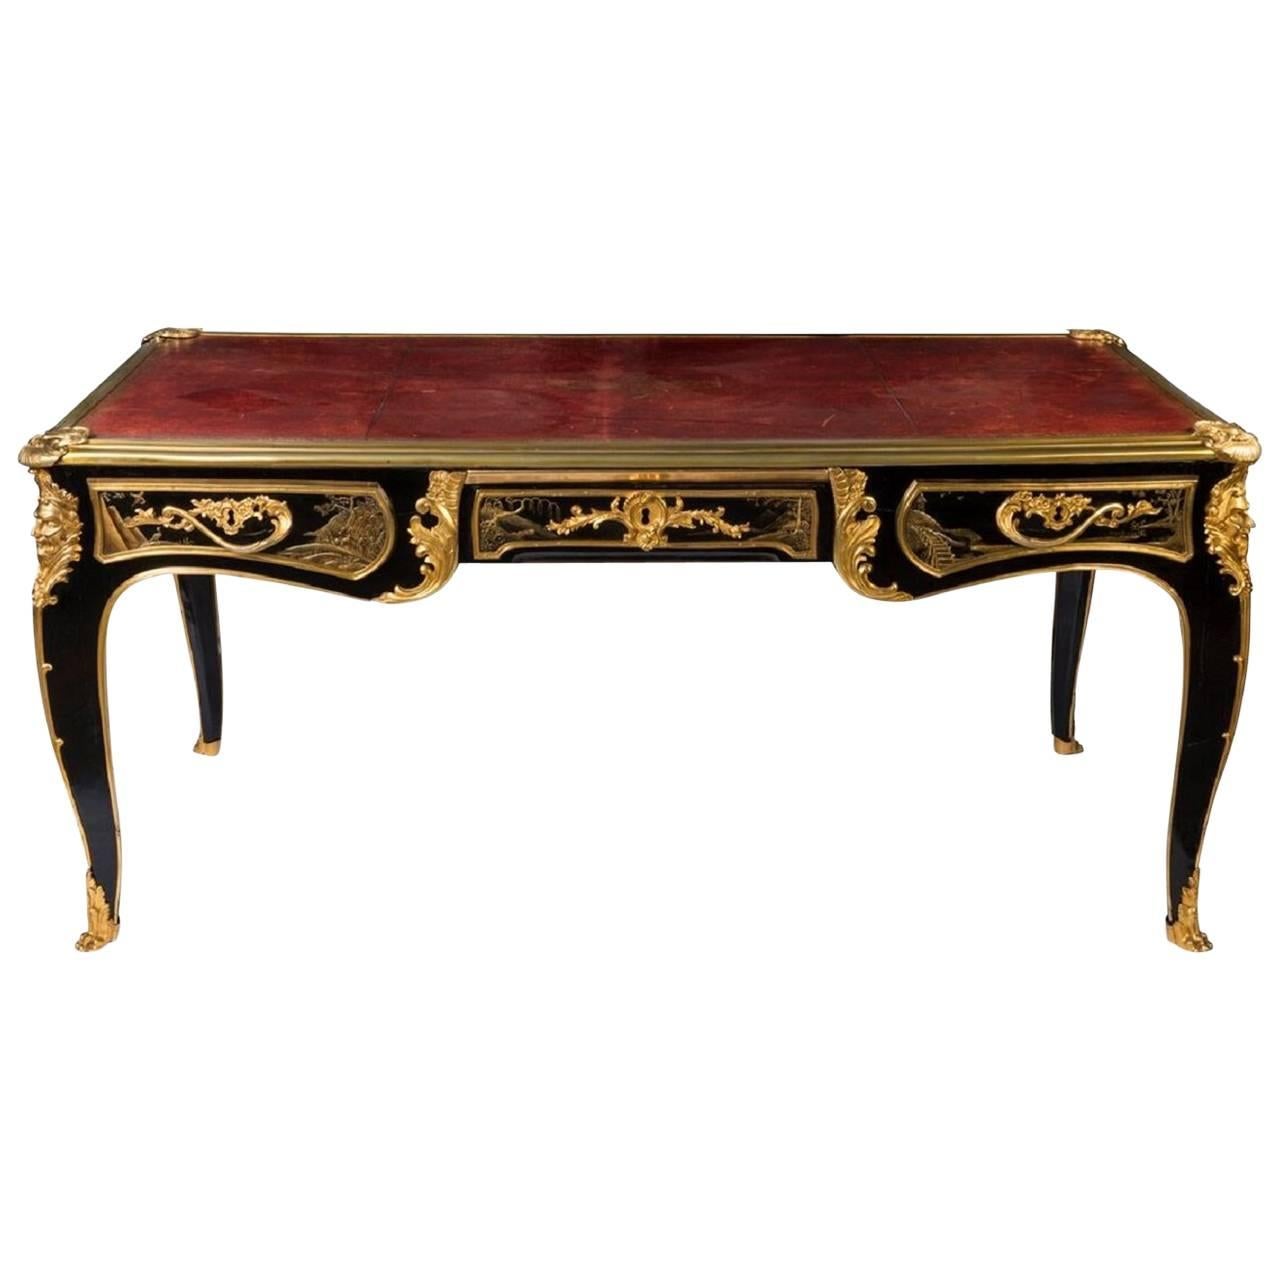 A 19th Century Black Lacquered and Ormolu-Mounted Bureauplat For Sale